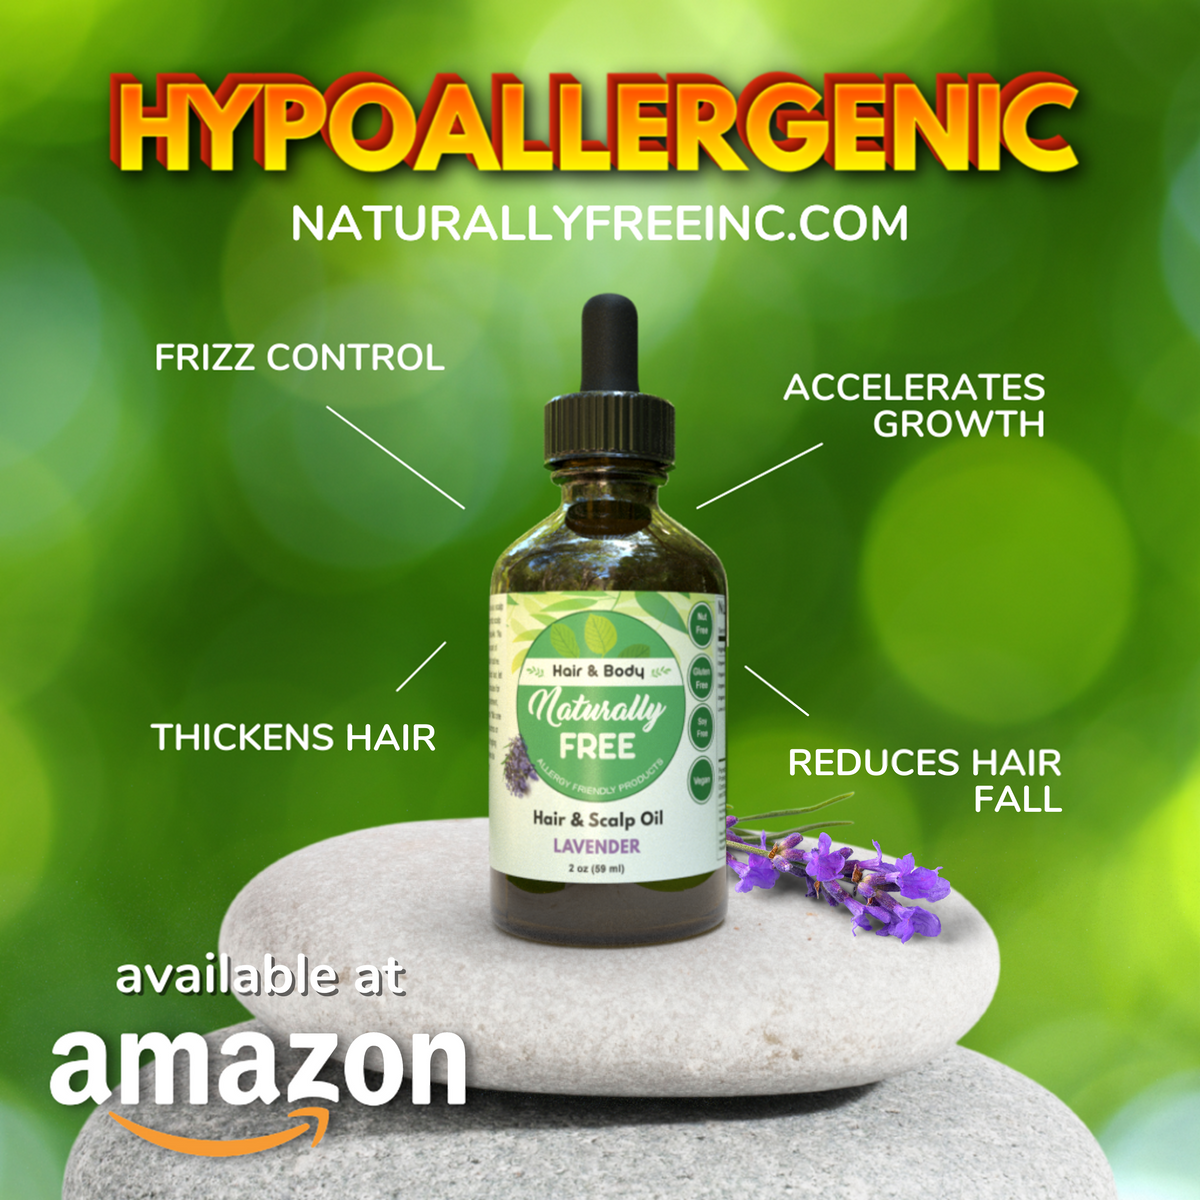 Lavender Hair & Scalp Growth Oil | Hypoallergenic - Allergy Friendly - Naturally Free